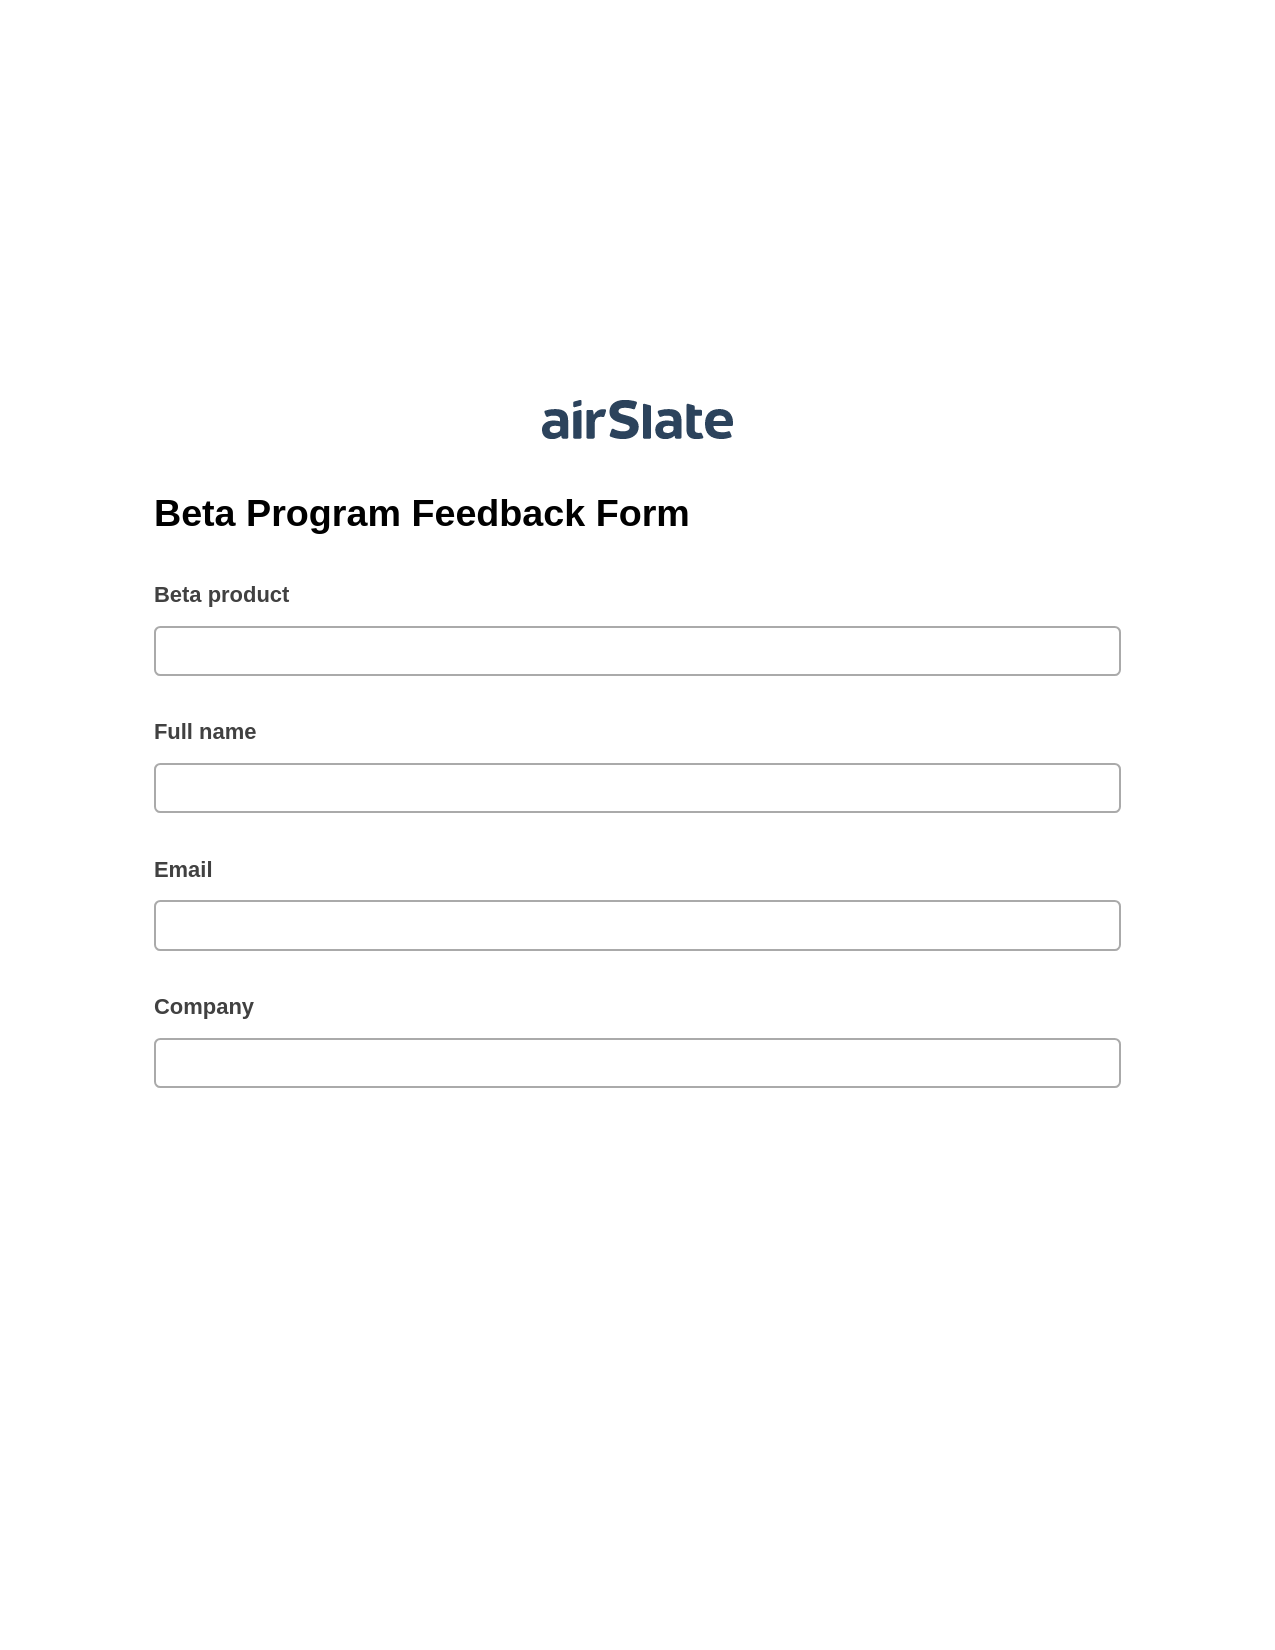 Multirole Beta Program Feedback Form Pre-fill Dropdowns from CSV File Bot, Open as Role Bot, Export to MySQL Bot